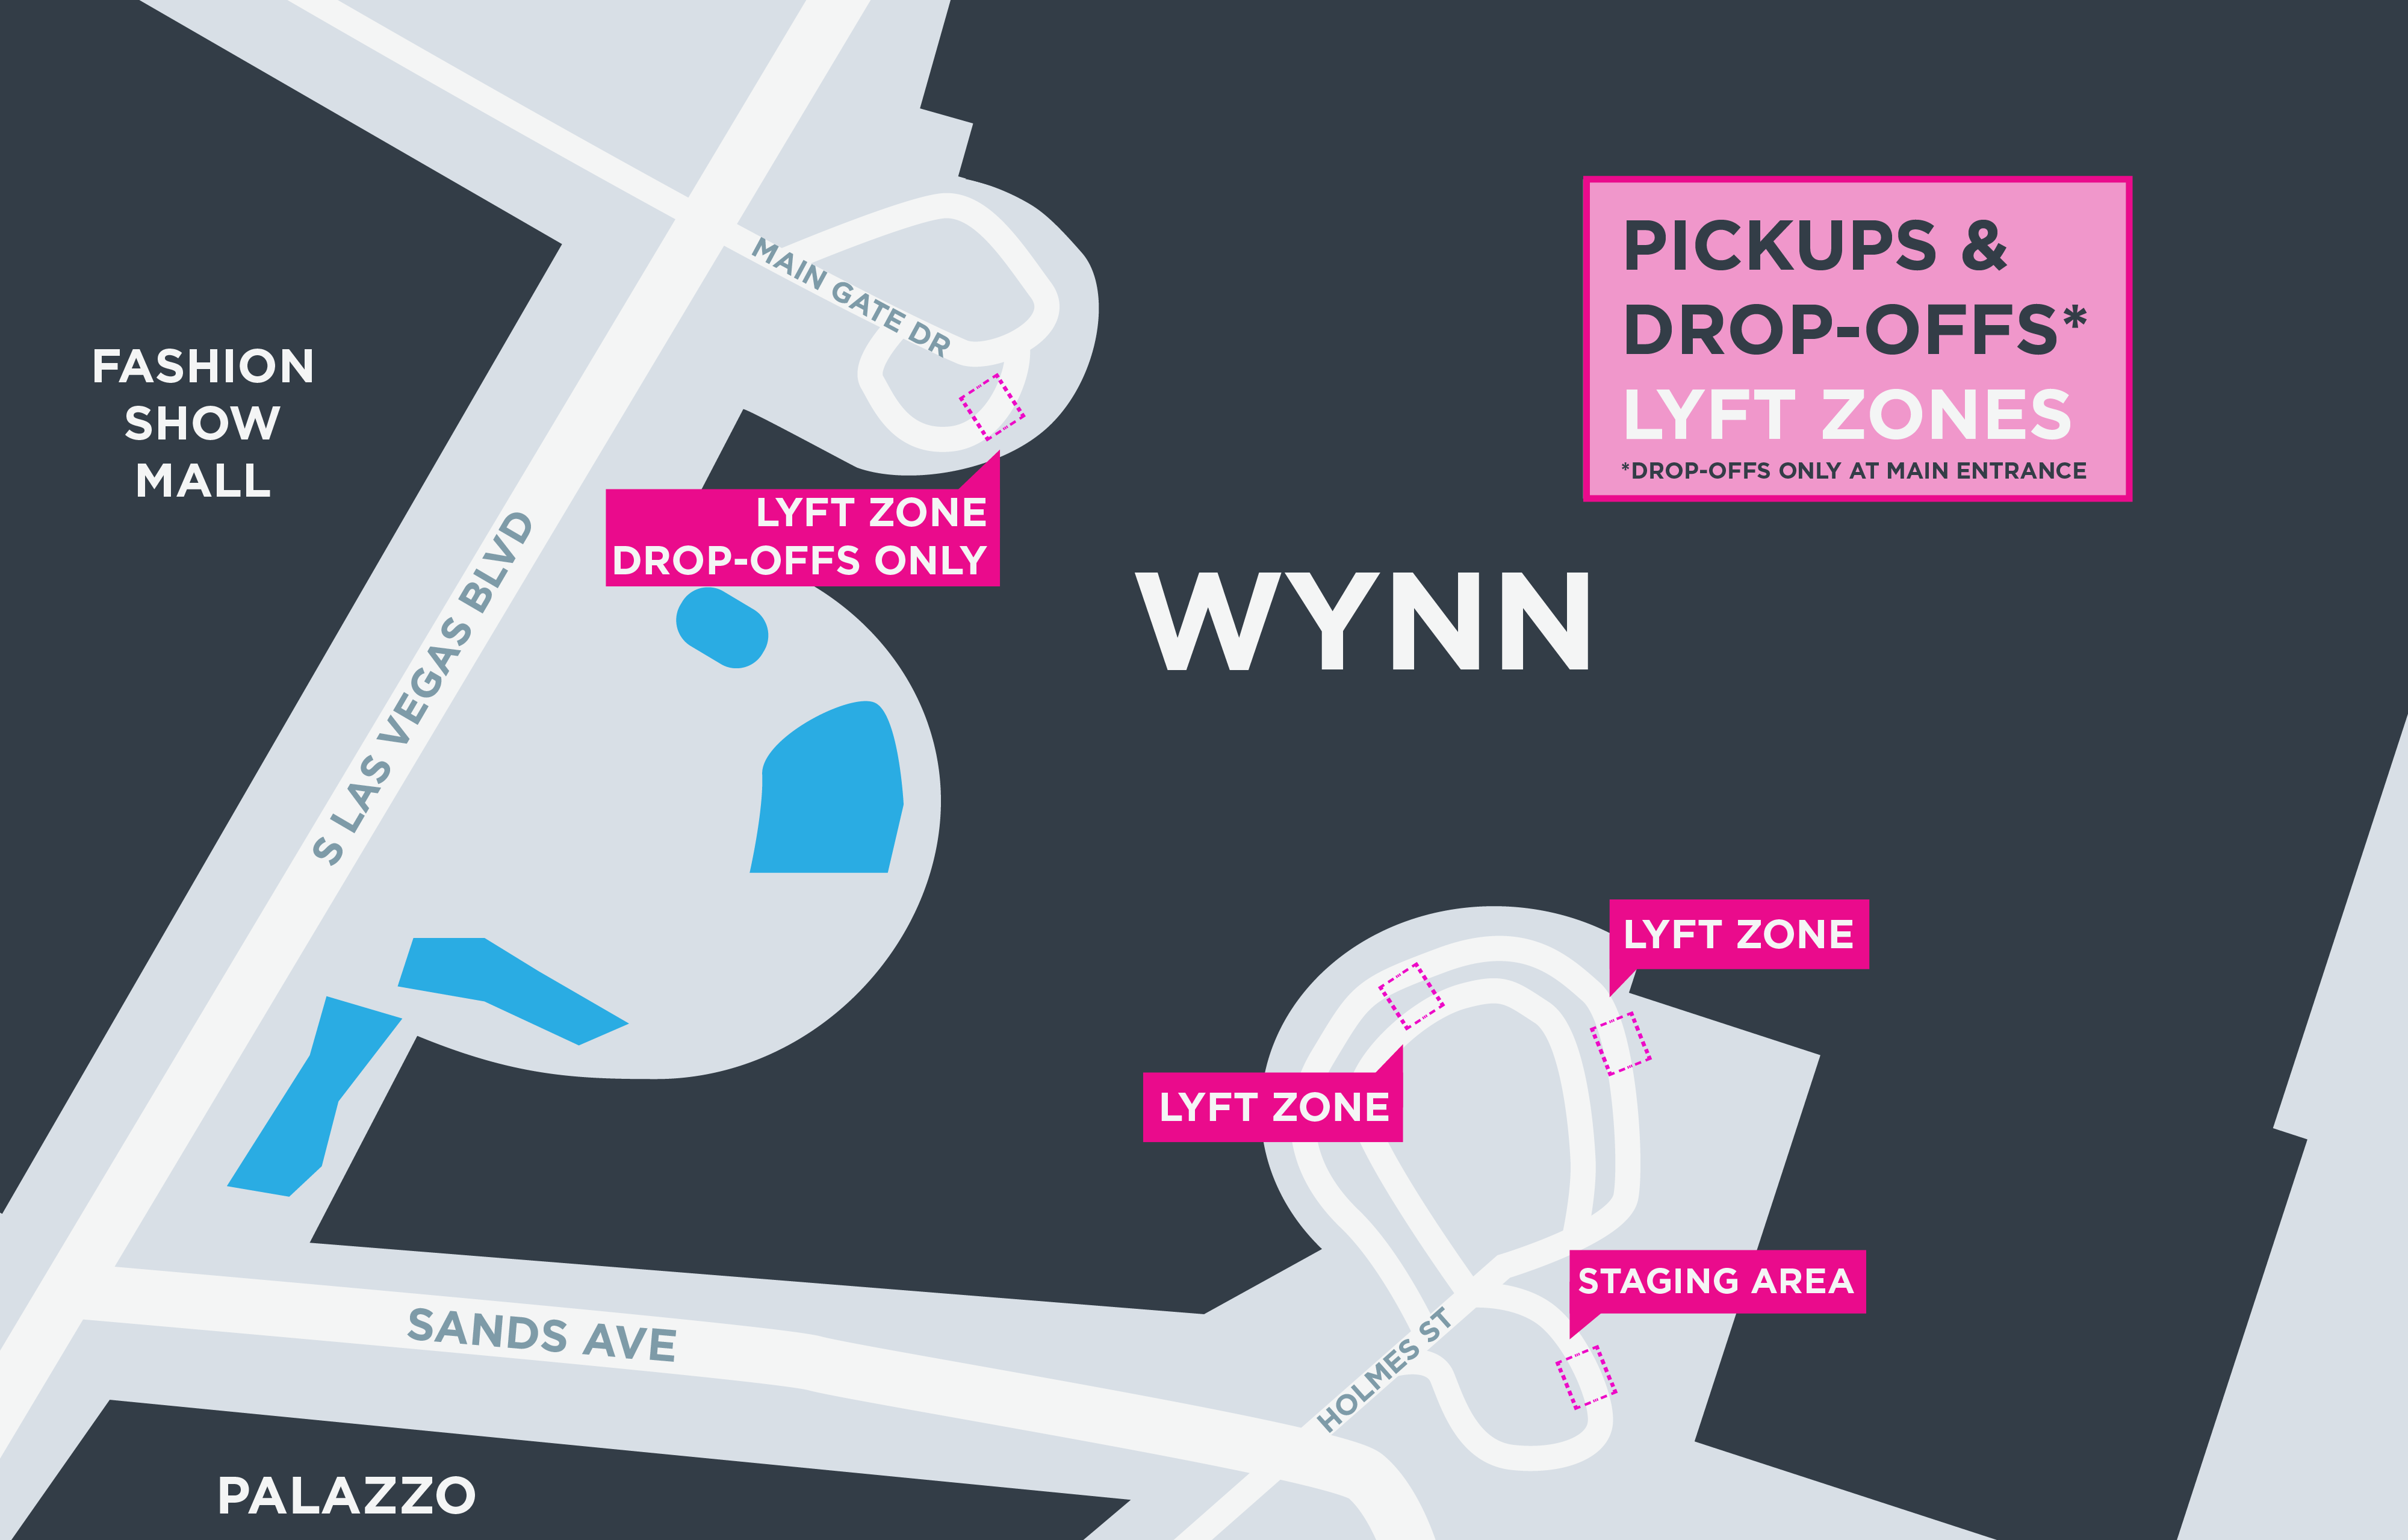 This image is a map of Wynn. It includes Lyft pickup and drop-off areas.